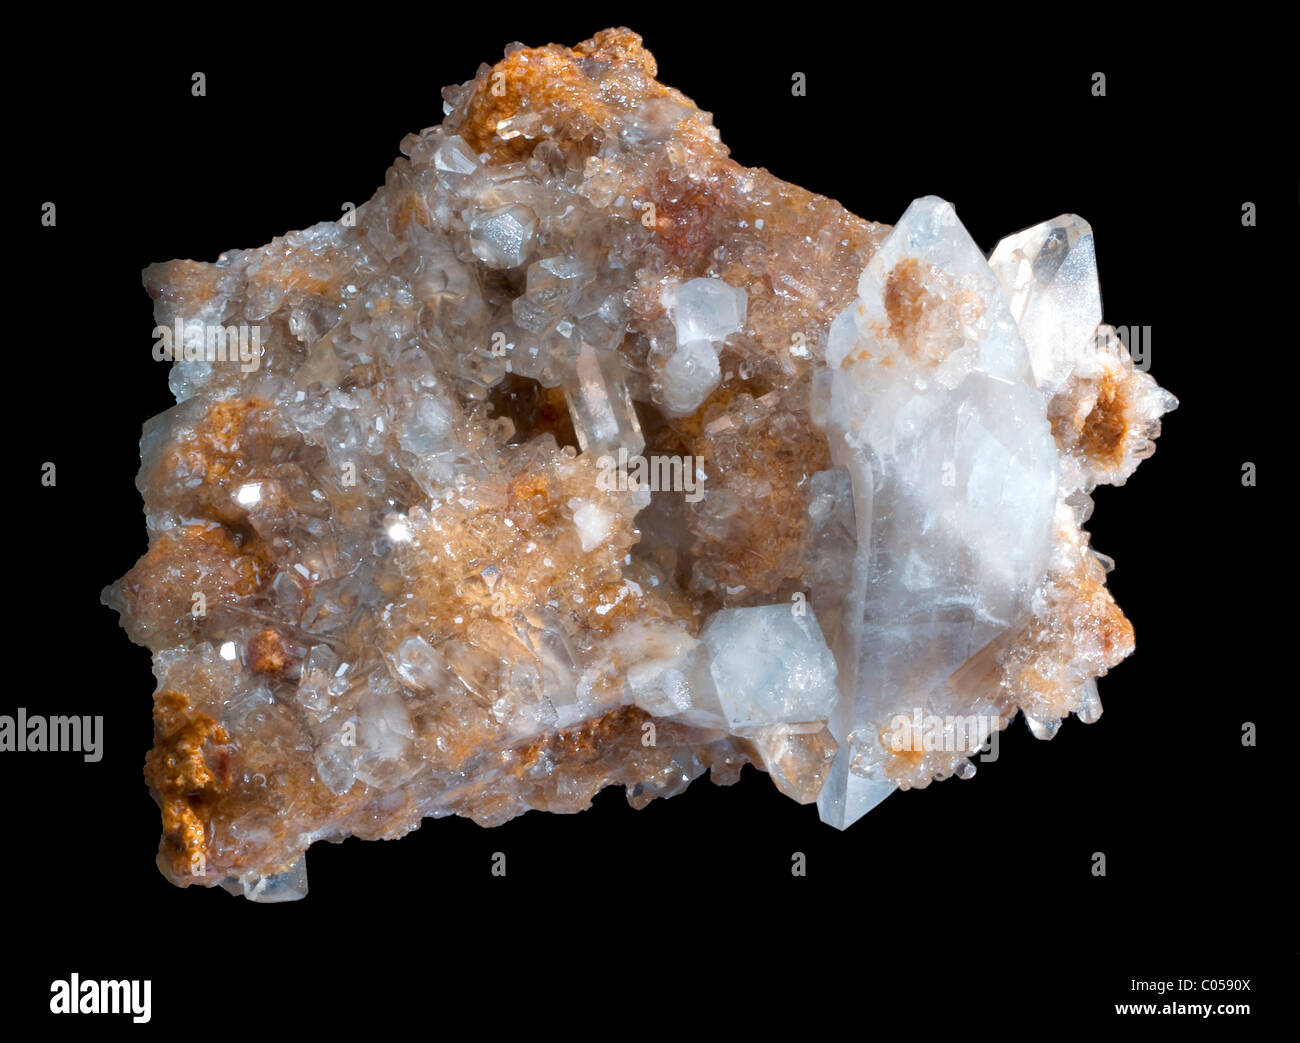 celestine crystal stone in a black isolated background Stock Photo